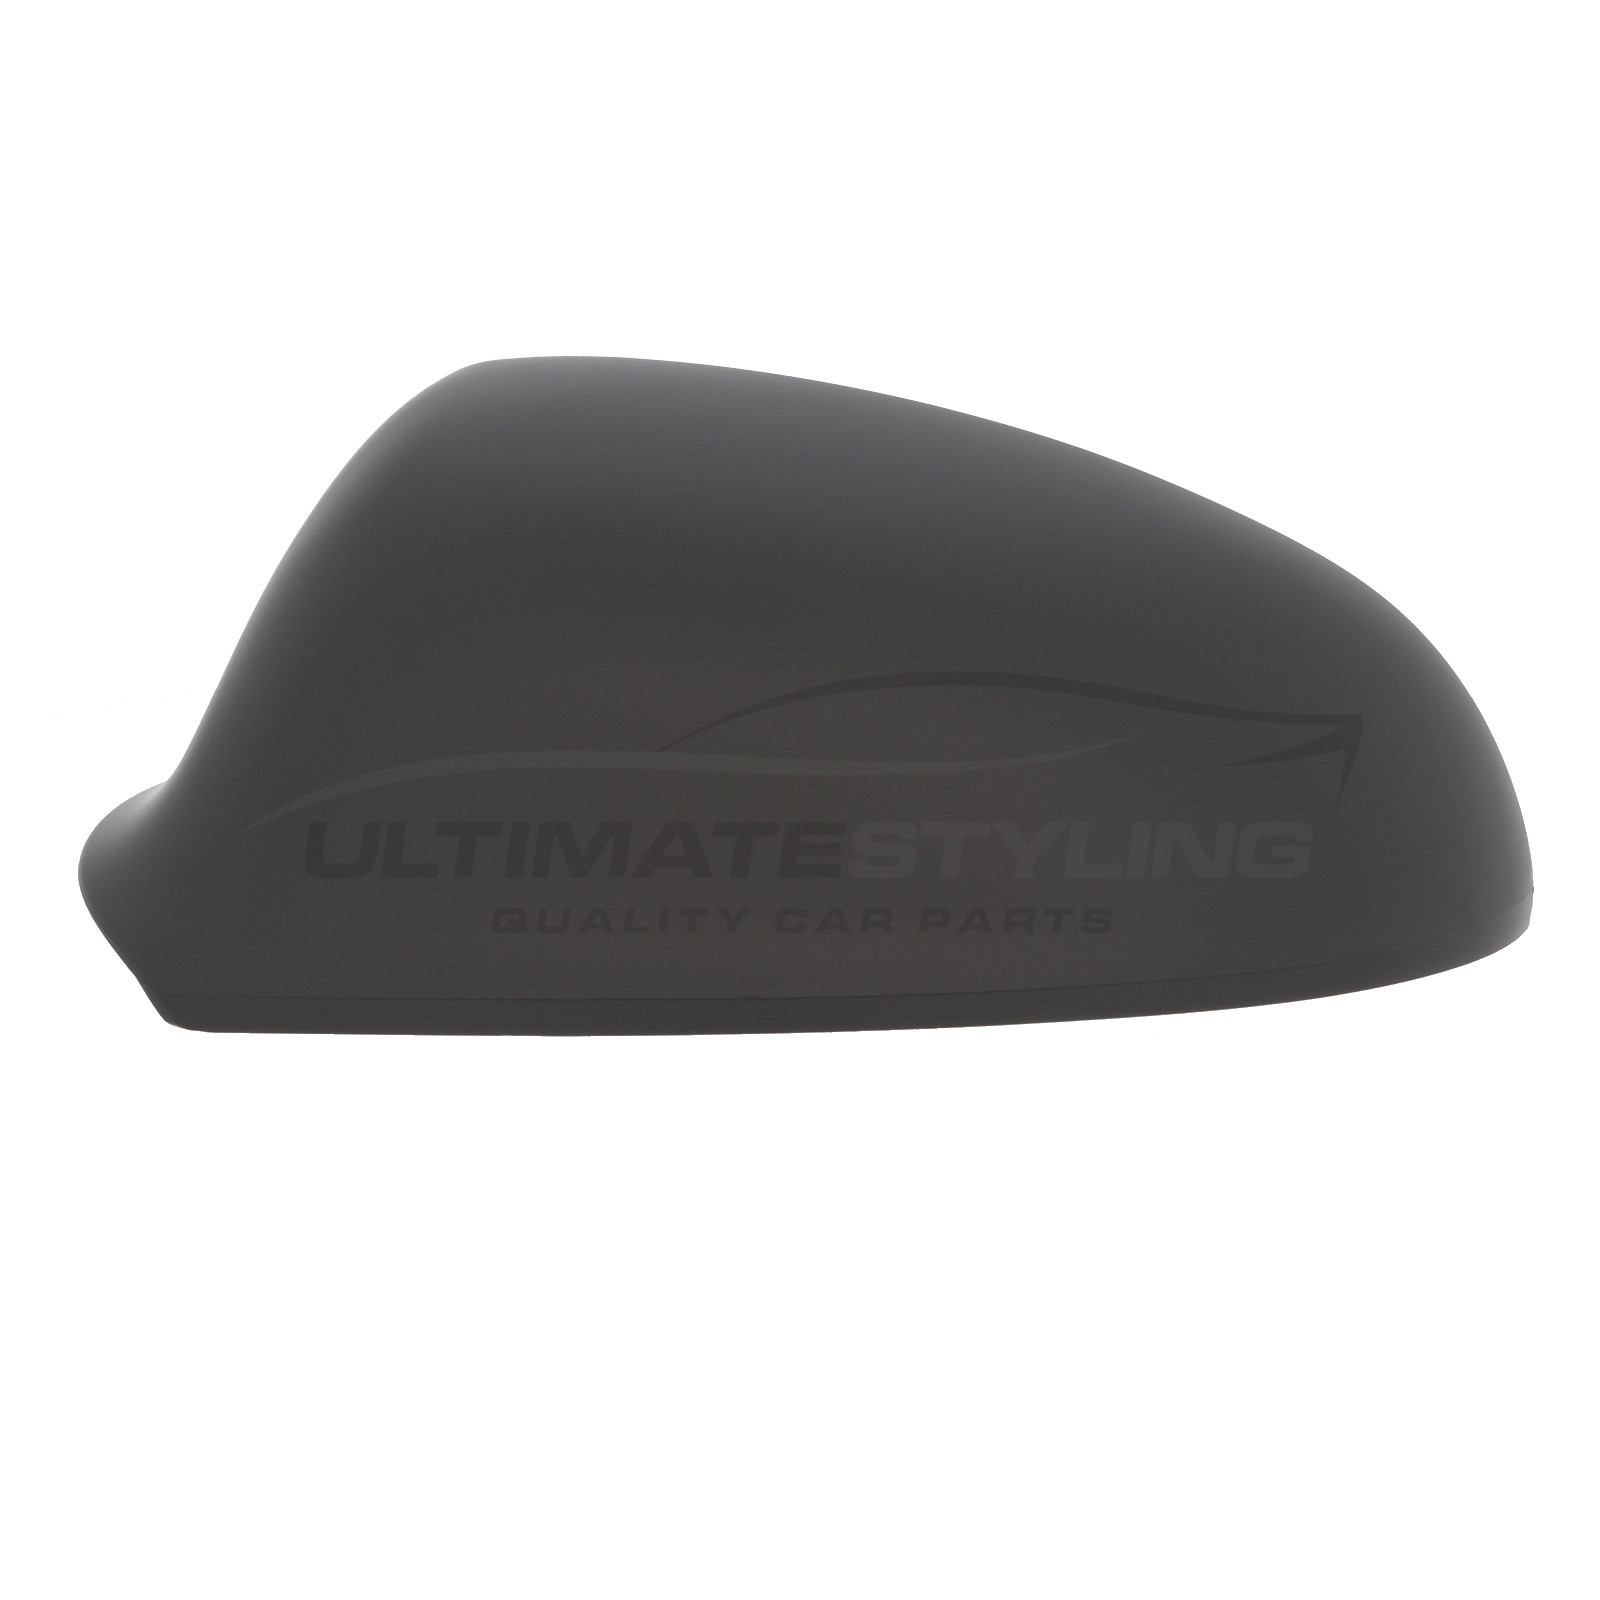 Vauxhall GTC 2014-2018, Vauxhall Astra 2009-2016, Vauxhall Cascada 2012-2018 Wing Mirror Cover Cap Casing Primed Passenger Side (LH)